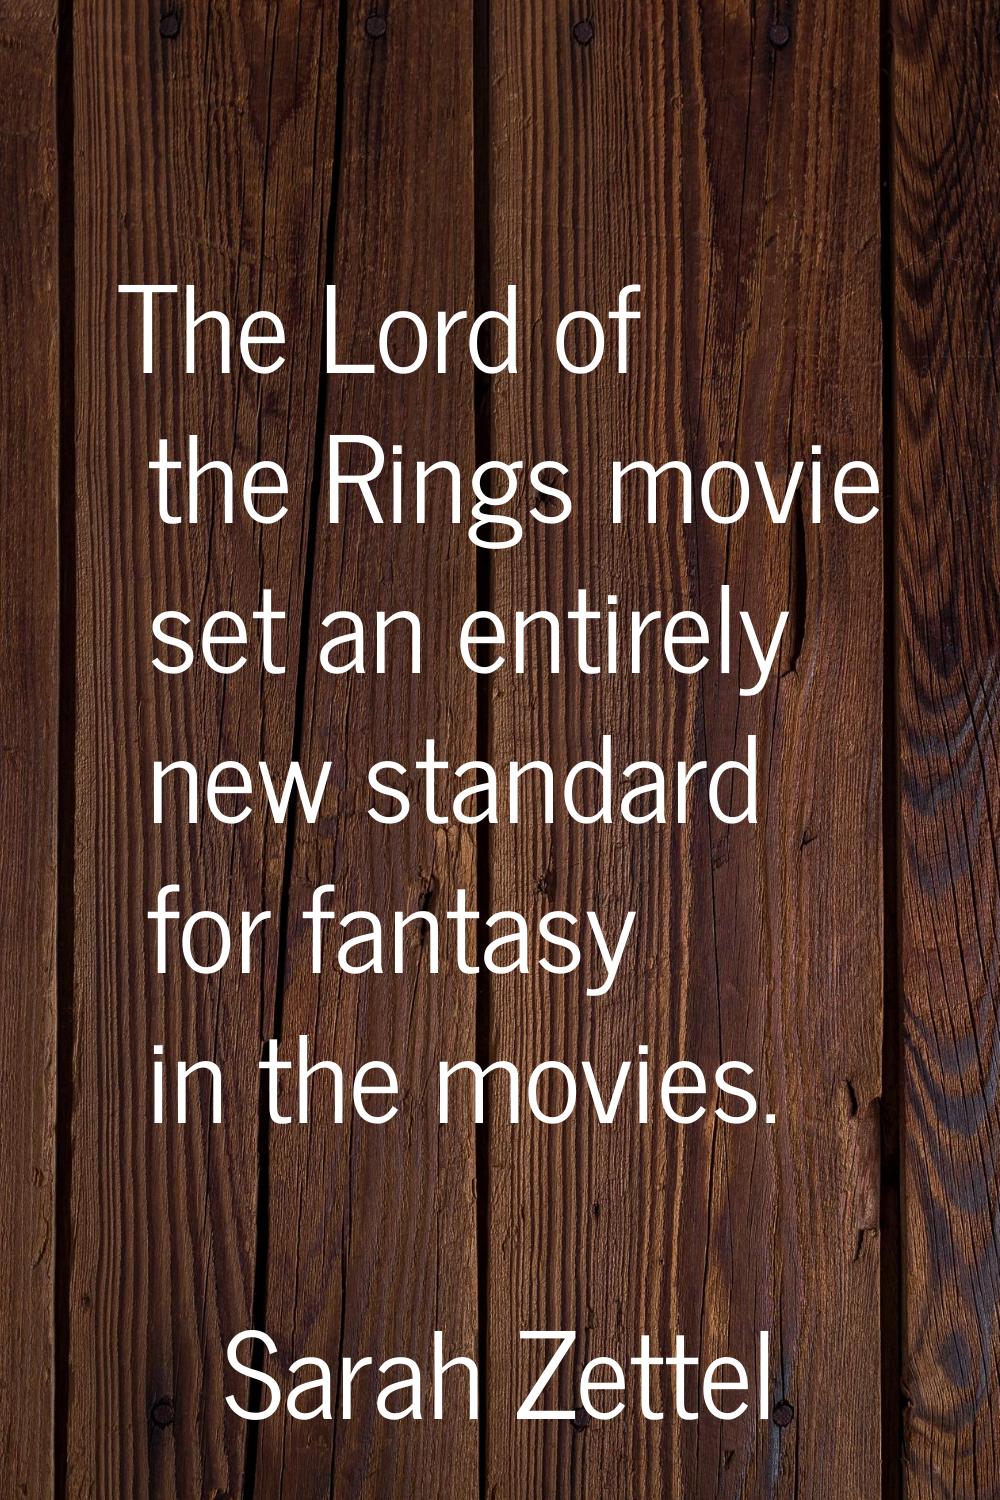 The Lord of the Rings movie set an entirely new standard for fantasy in the movies.